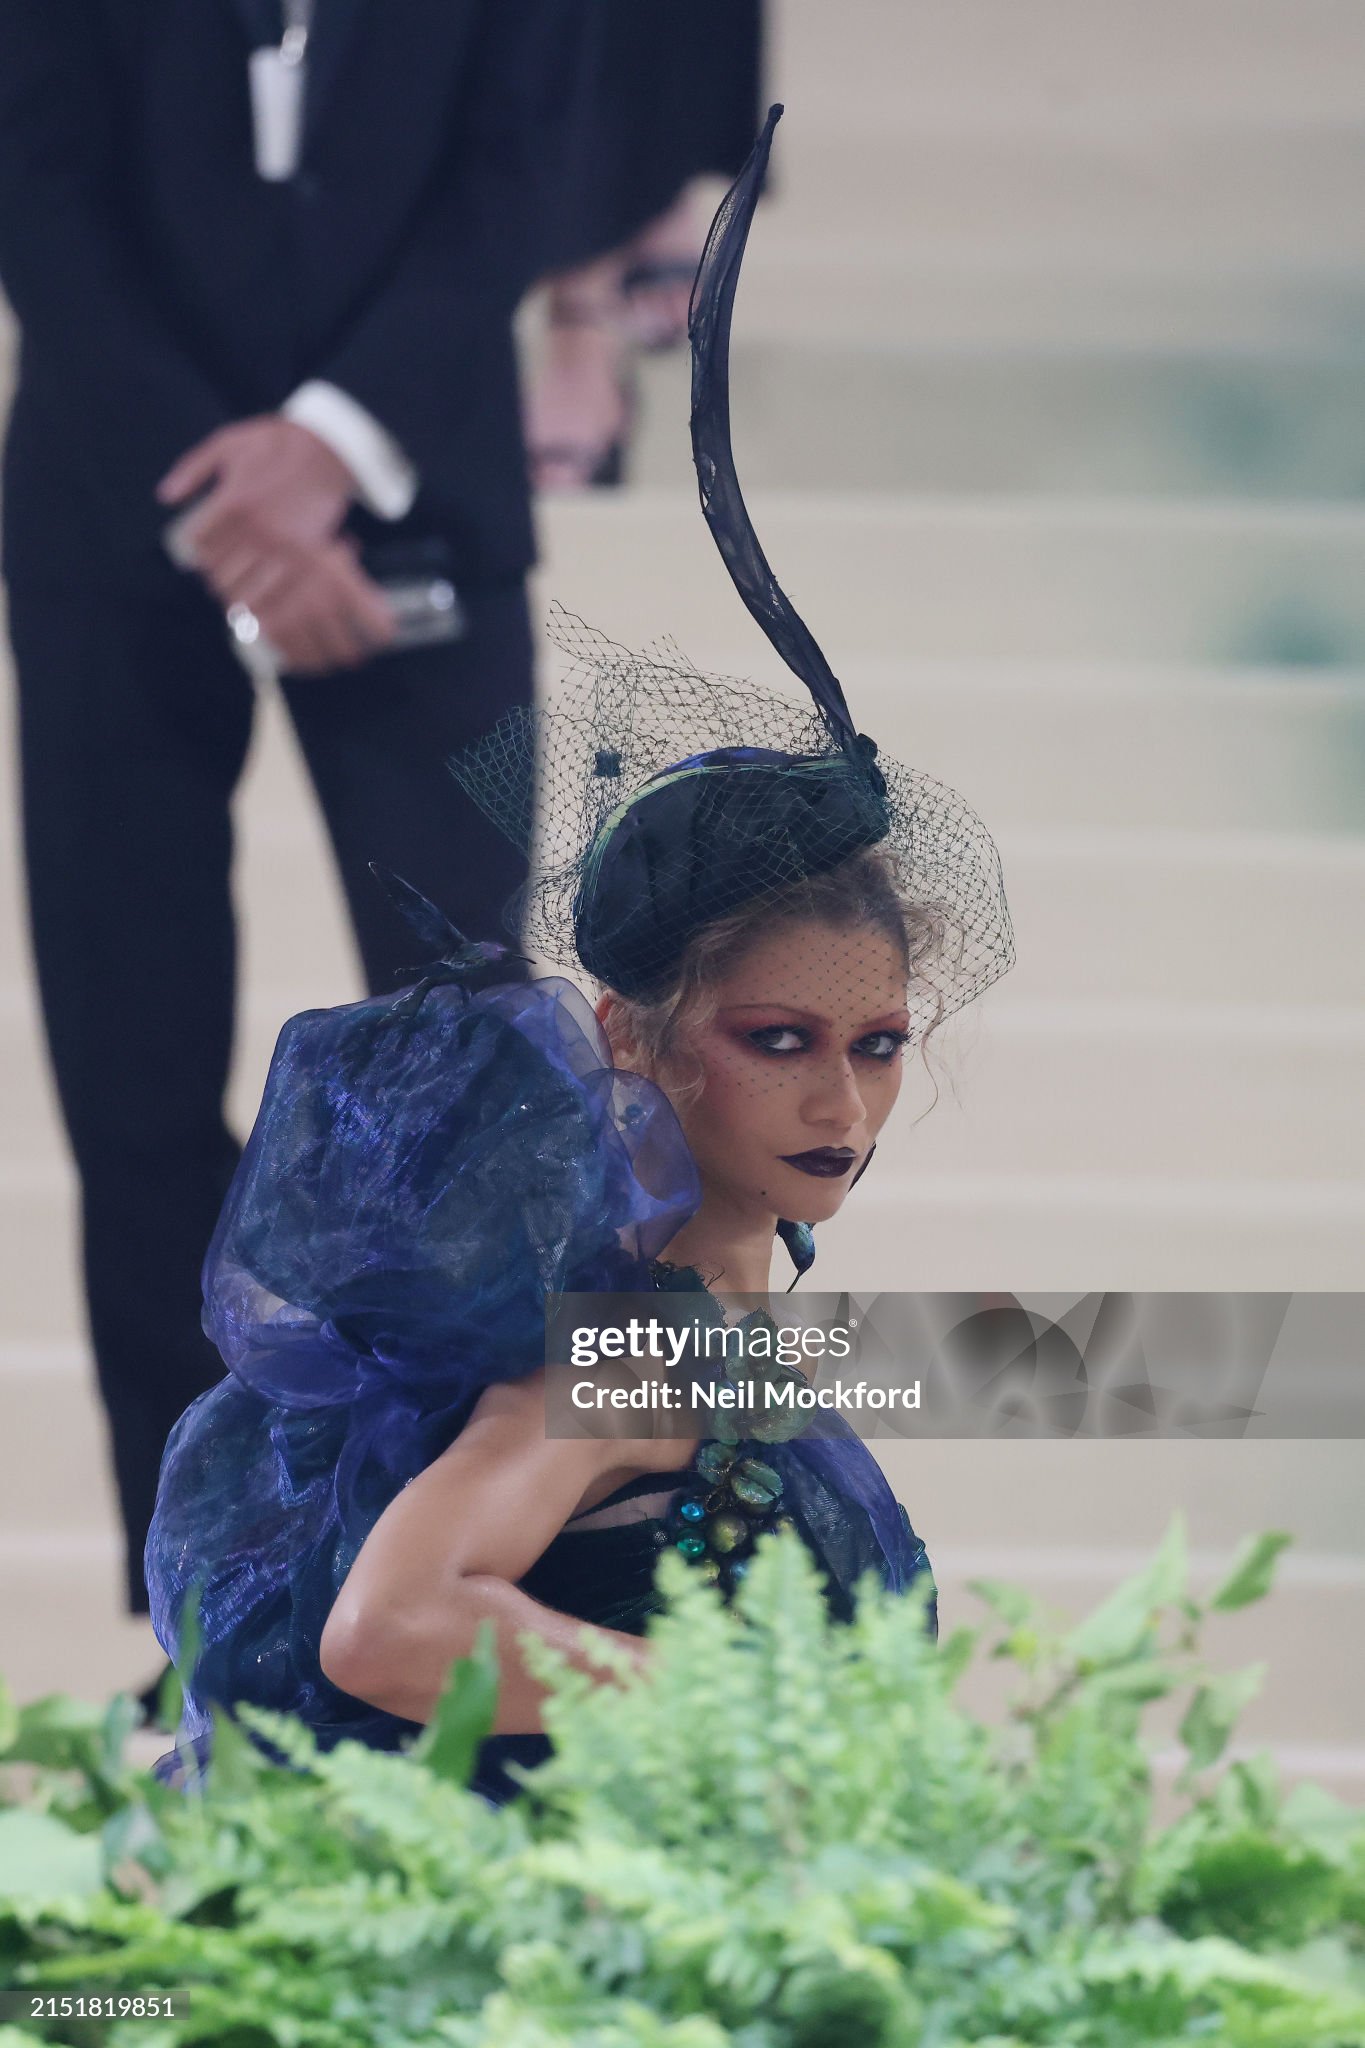 gettyimages-2151819851-2048x2048.jpg